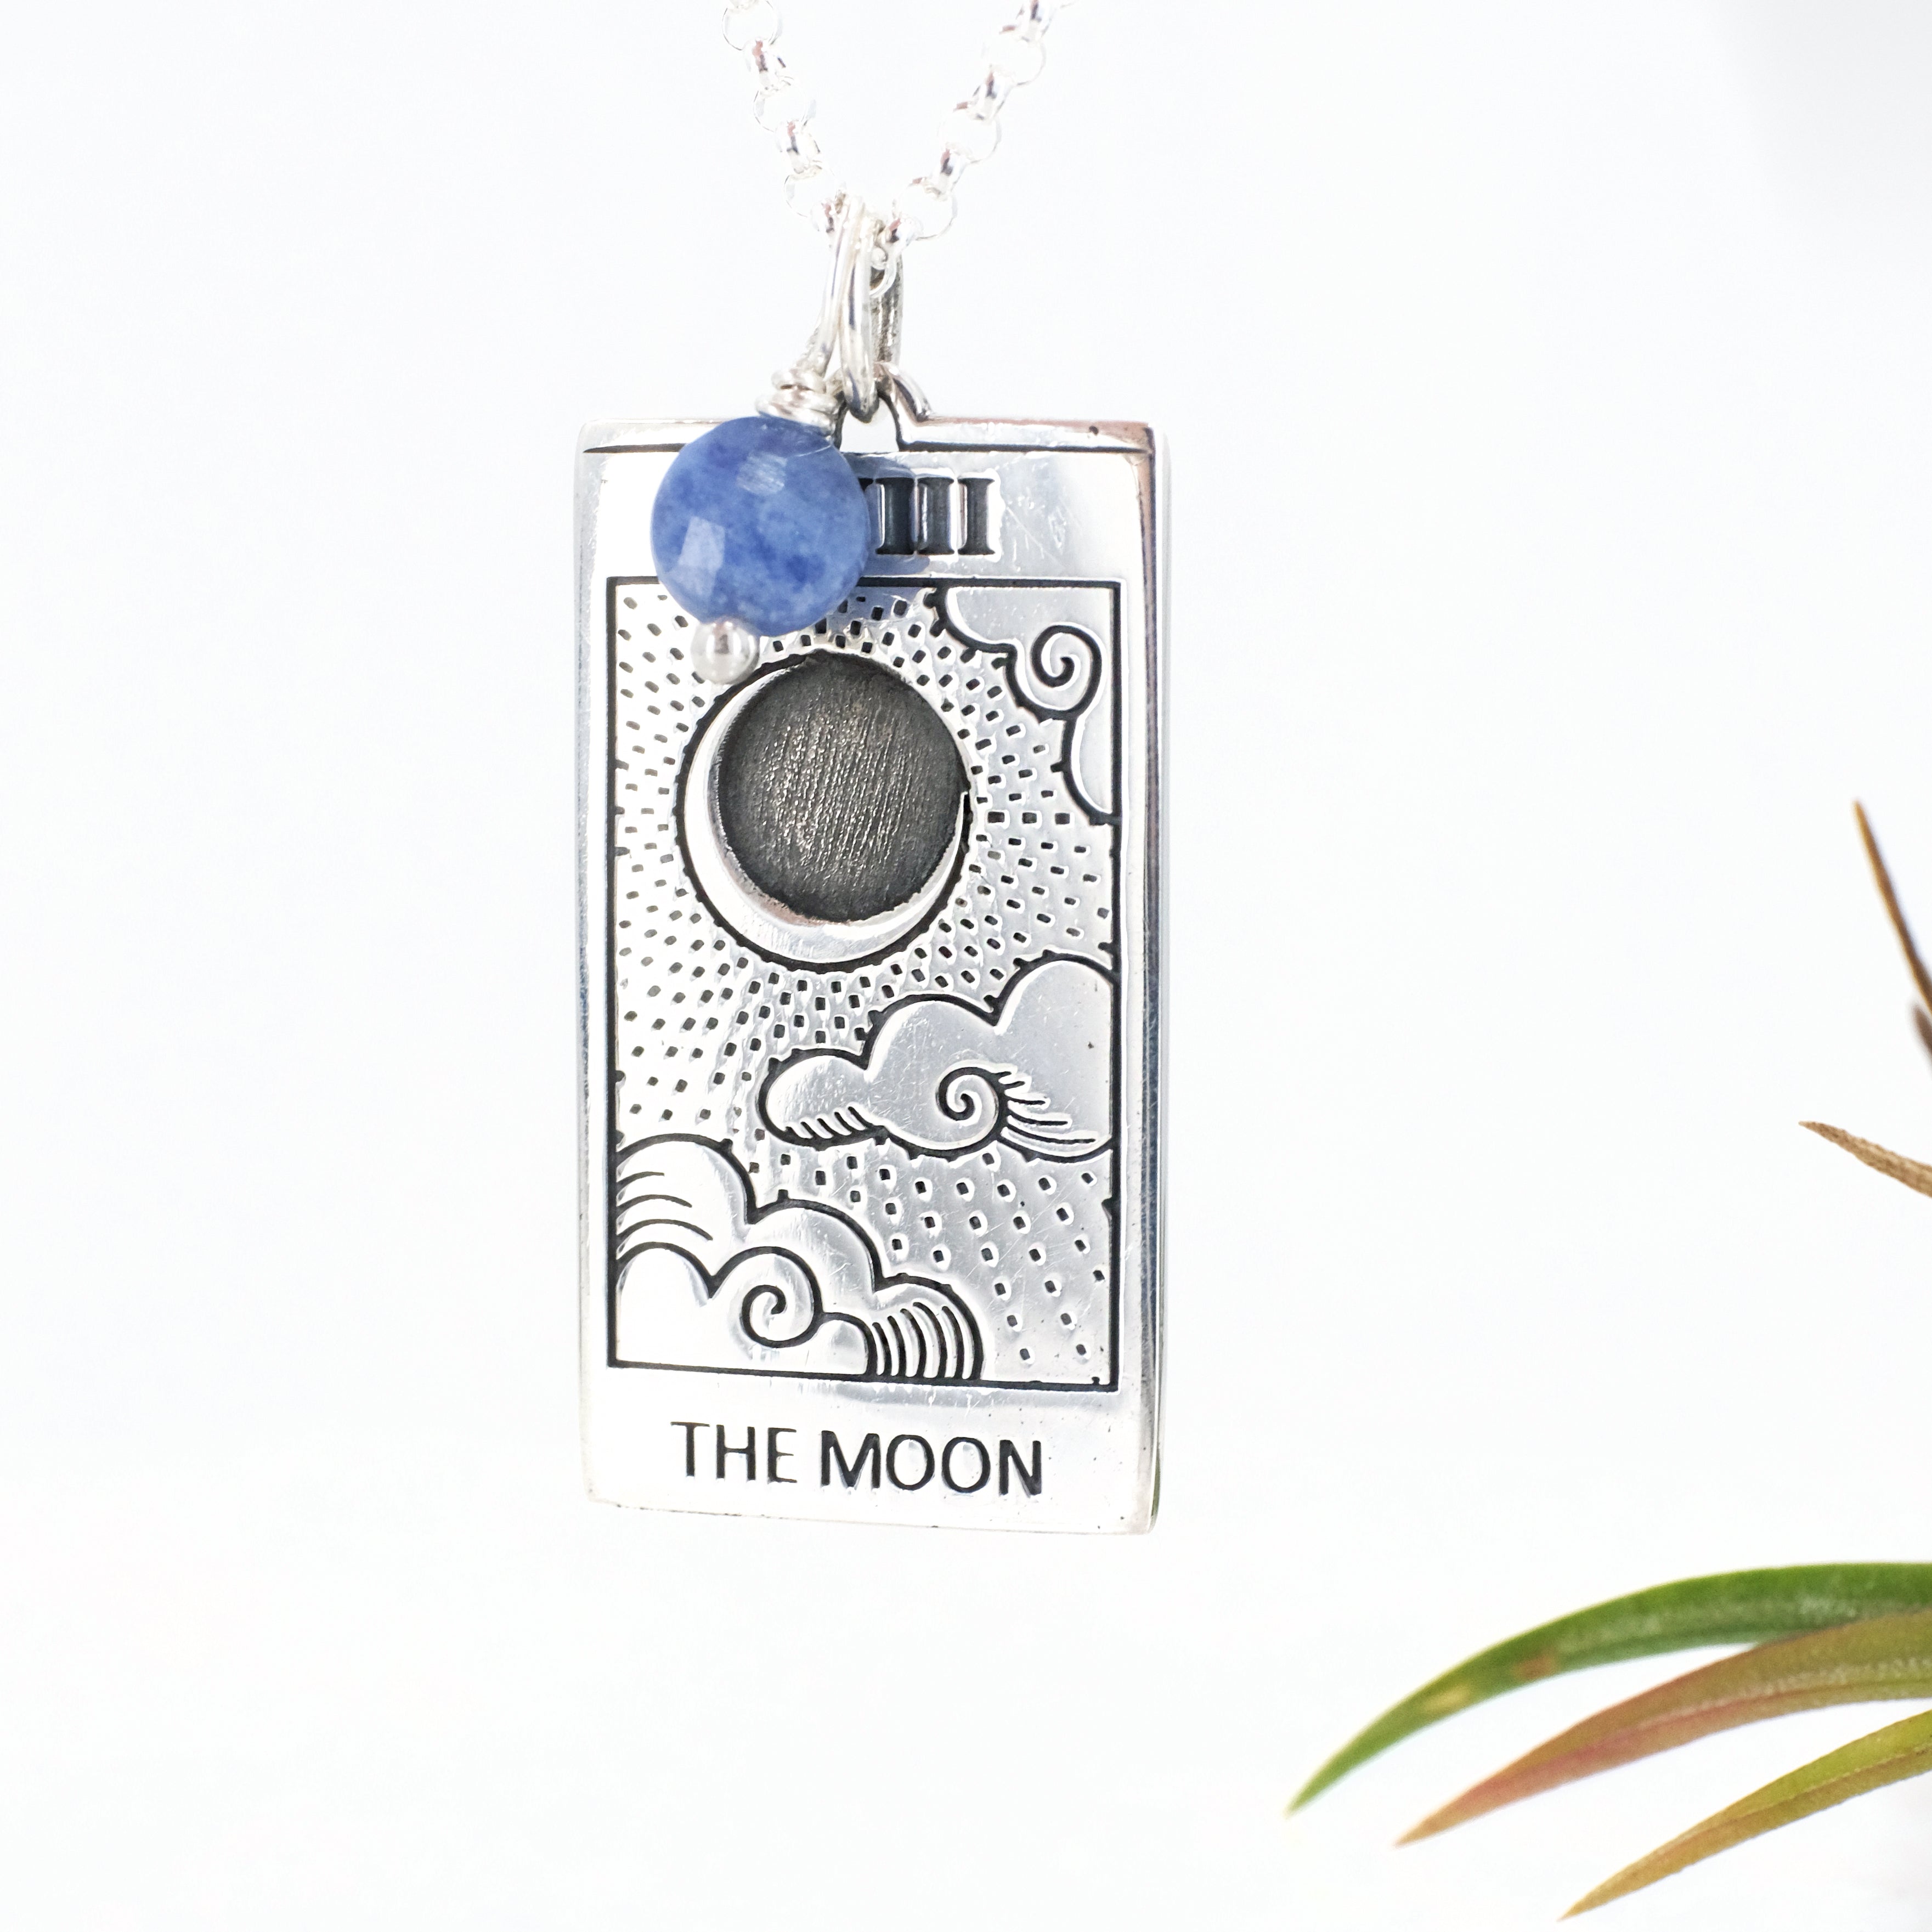 Monday Moon Tarot Sterling Necklace